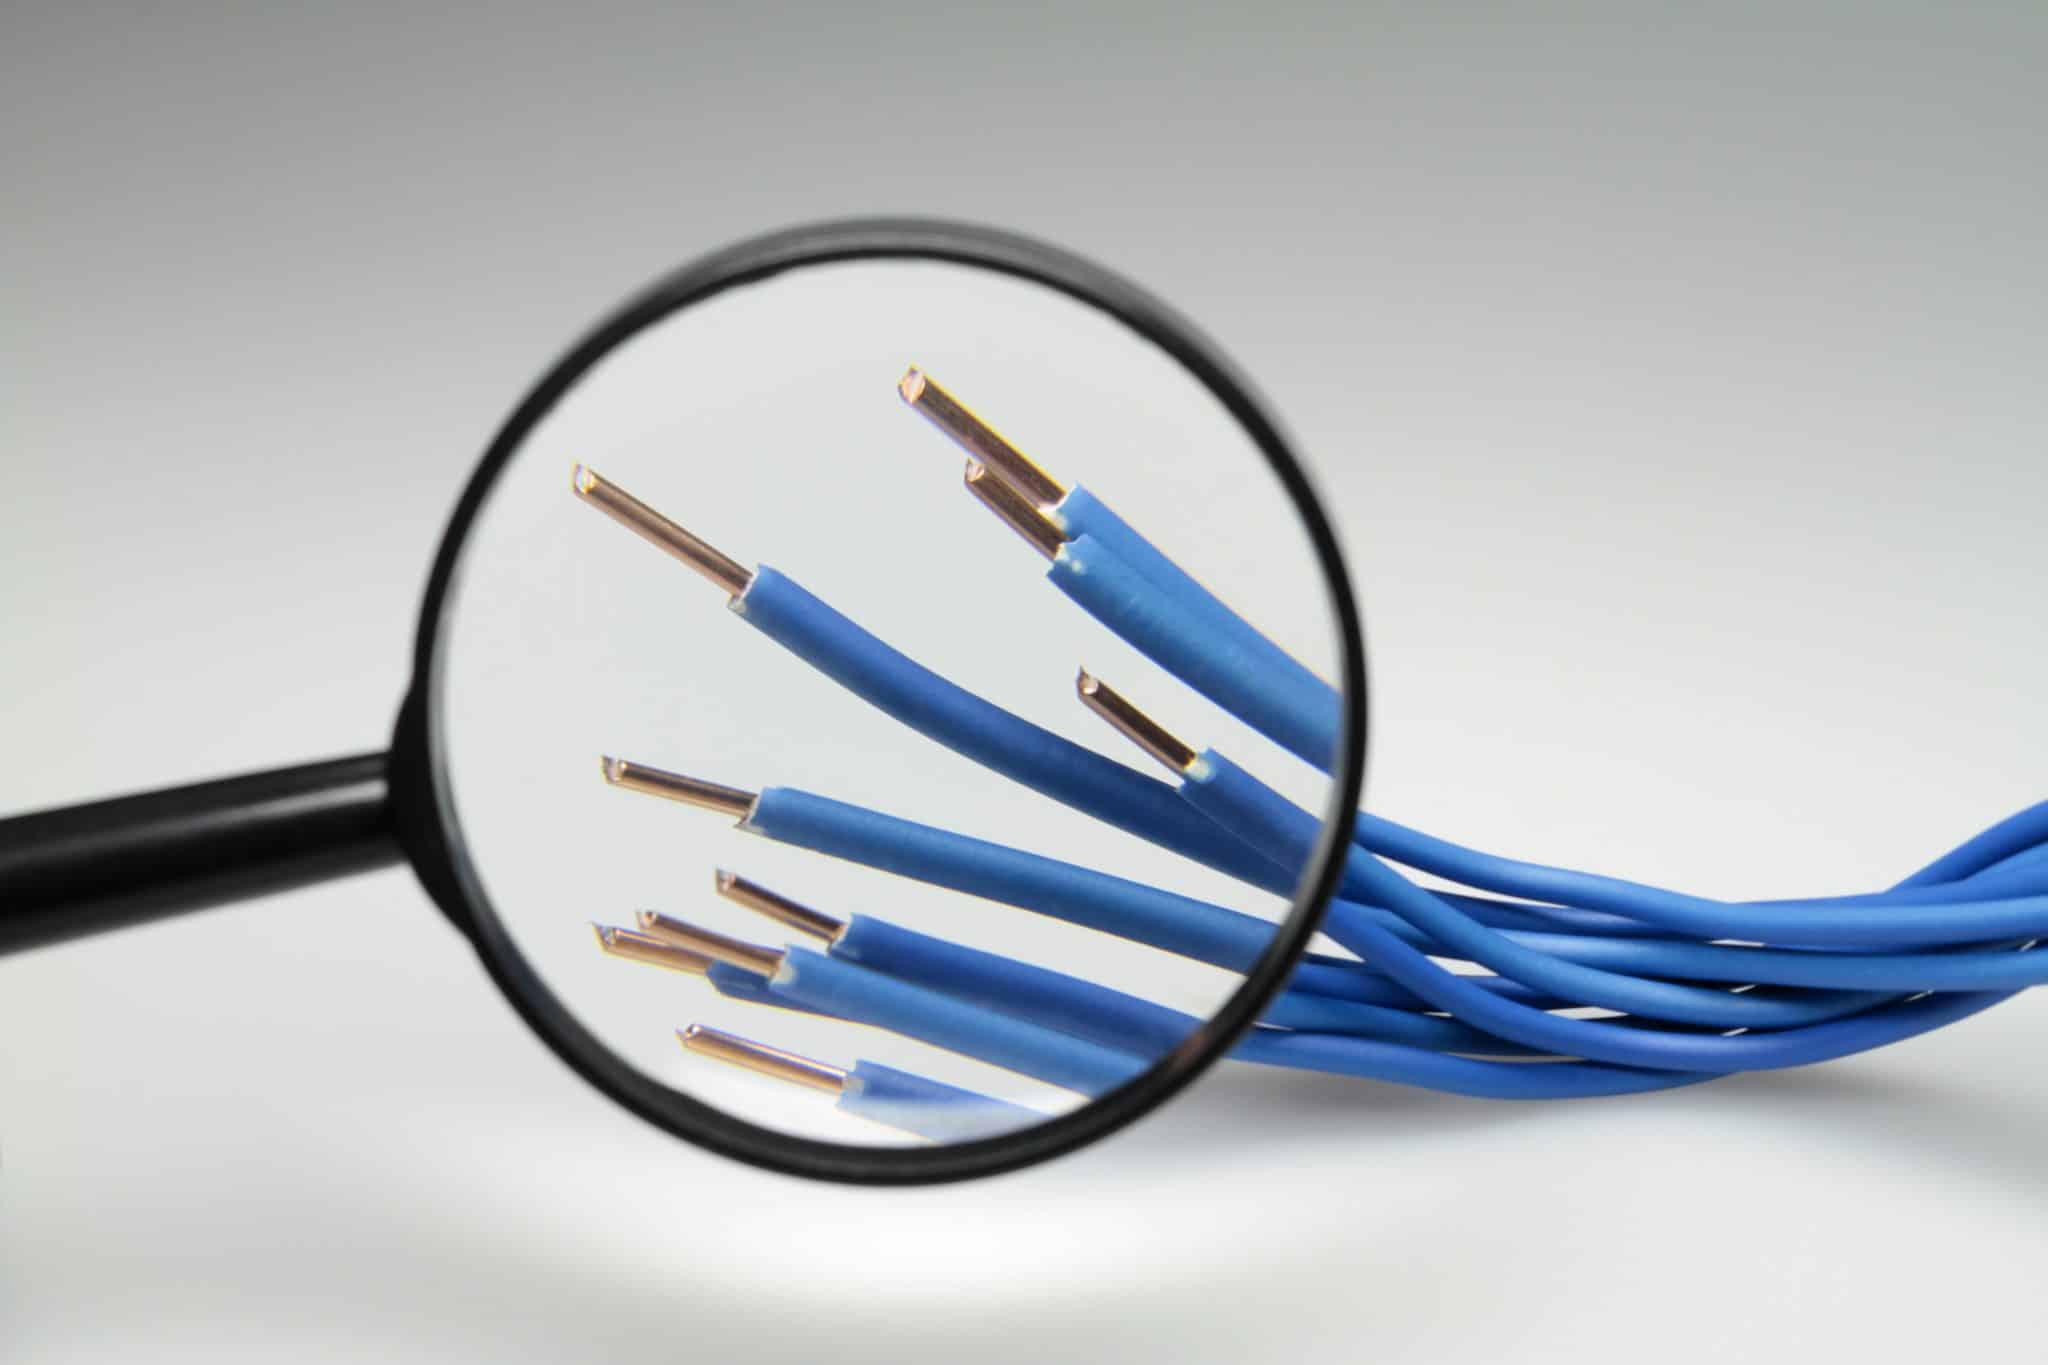 How to spot counterfeit data cables